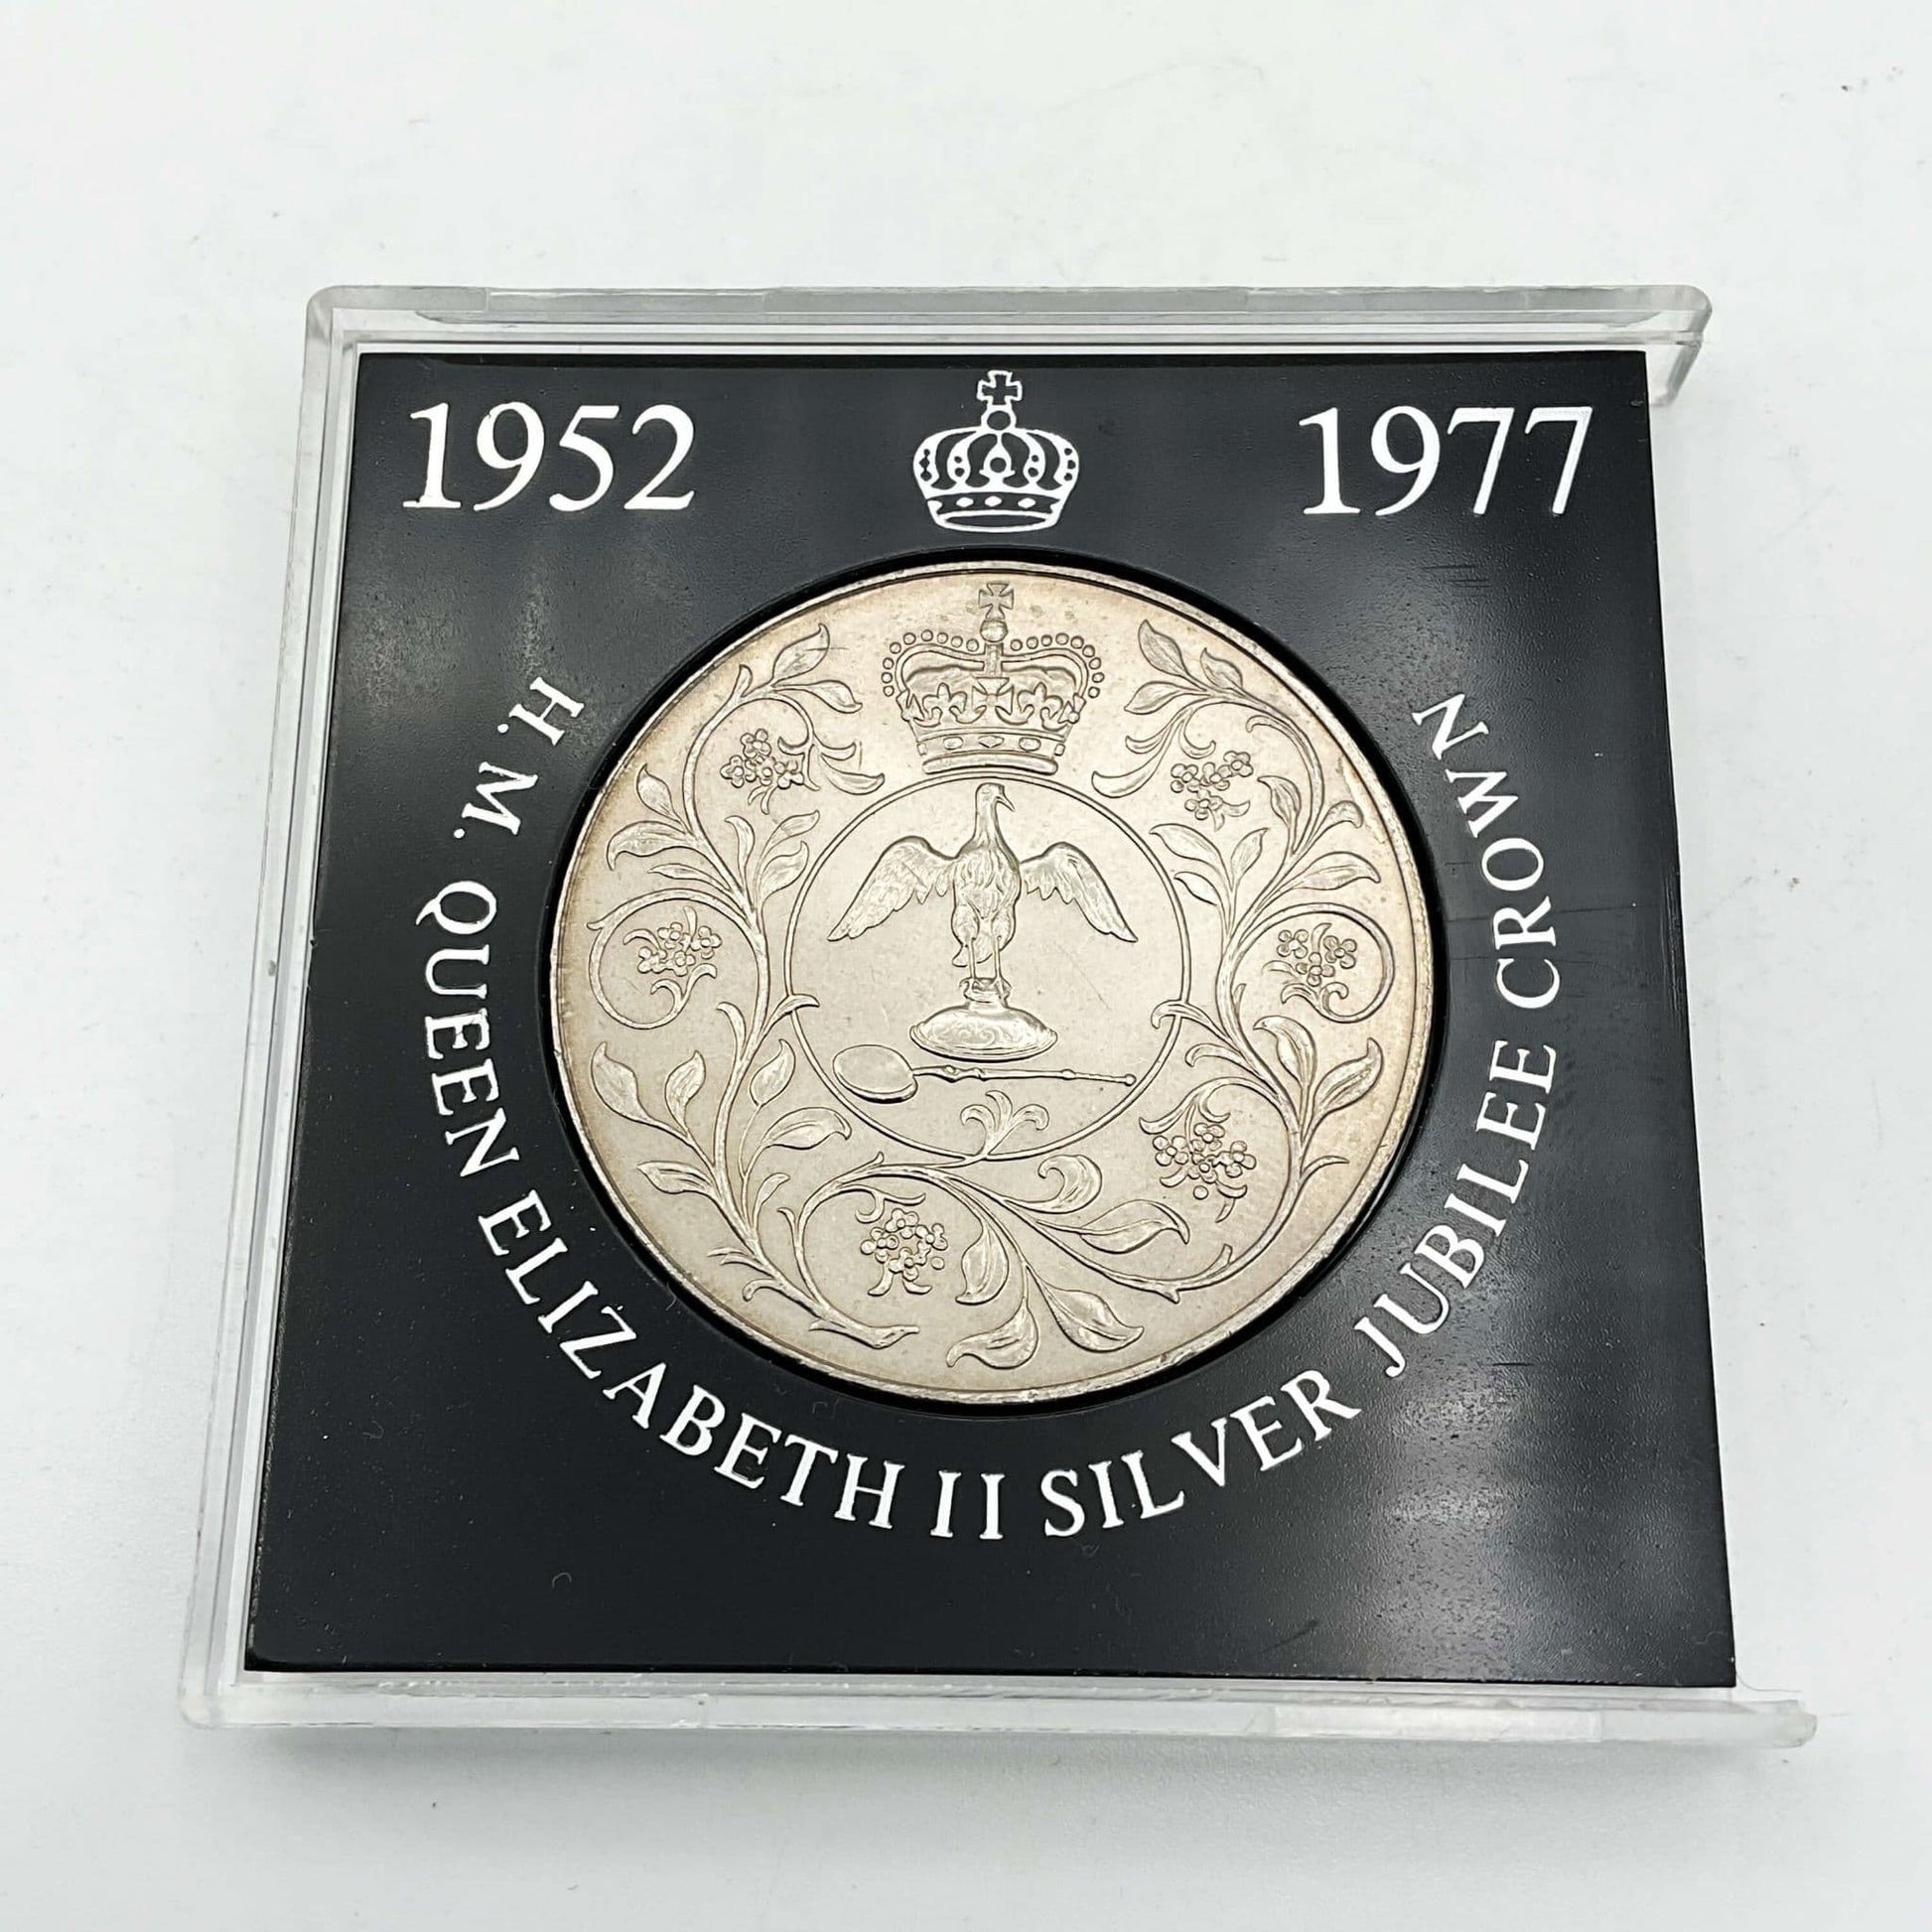 silver crown coin in a black case with HM Queen Elizabeth II Jubliee Crown with the perspex cover removed